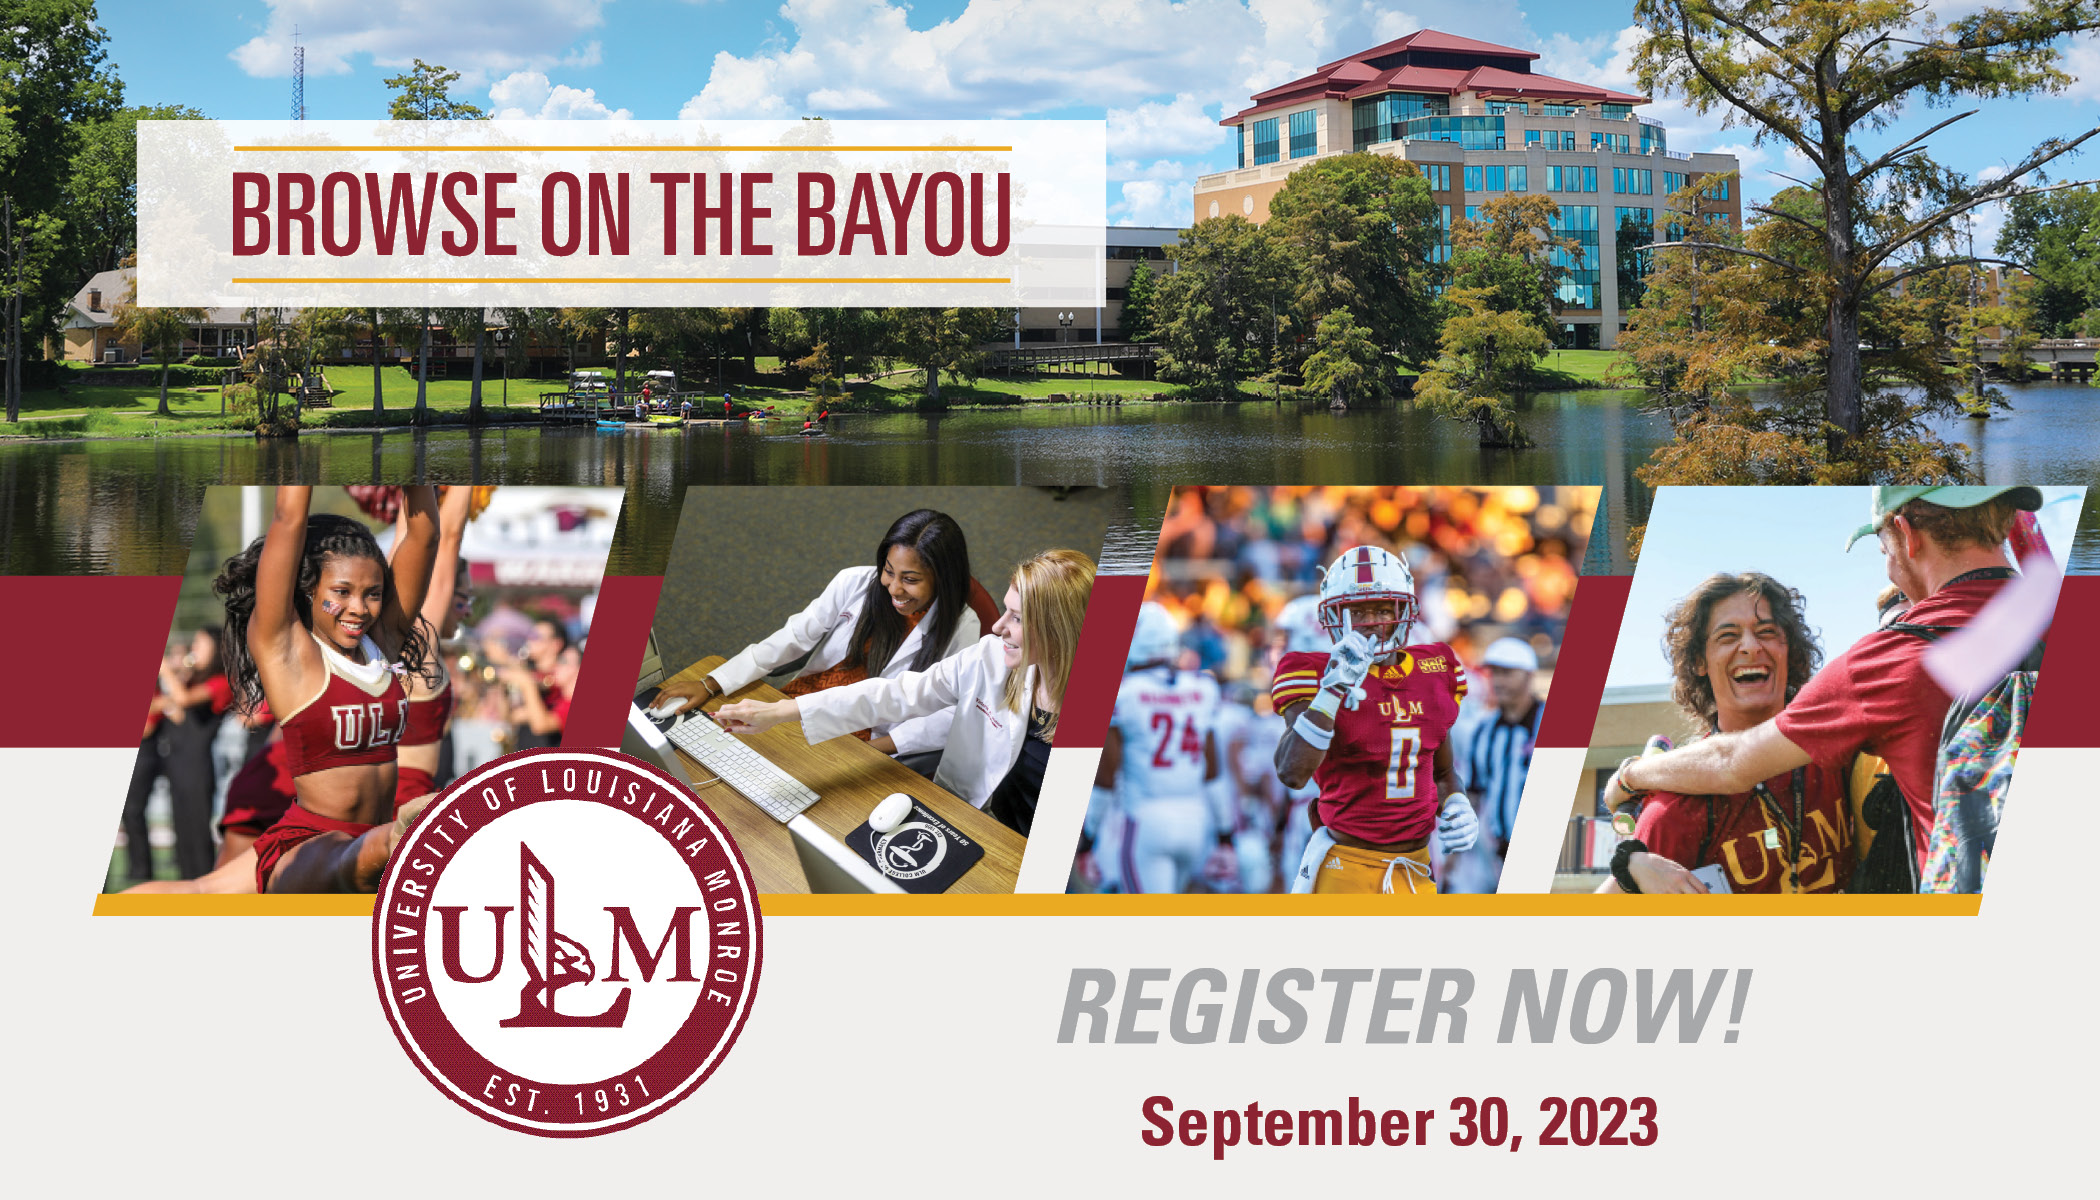 Four photos (a cheerleader, two students pointing at a computer, a baseball player, and two students smiling and embracing) layover an image of a tall building overlooking a bayou. People are kayaking on the bayou. ULM's logo is in the corner. Text reads, "Browse on the Bayou. ulm.edu/browse REGISTER NOW! At Browse on the Bayou, you will explore ULM's beautiful campus, discover academic opportunities, and meet students and professors in the Warhawk family. Whether you are a high school student or a transfer from another college, you are bound to learn something new about student life, financial aid, and more."